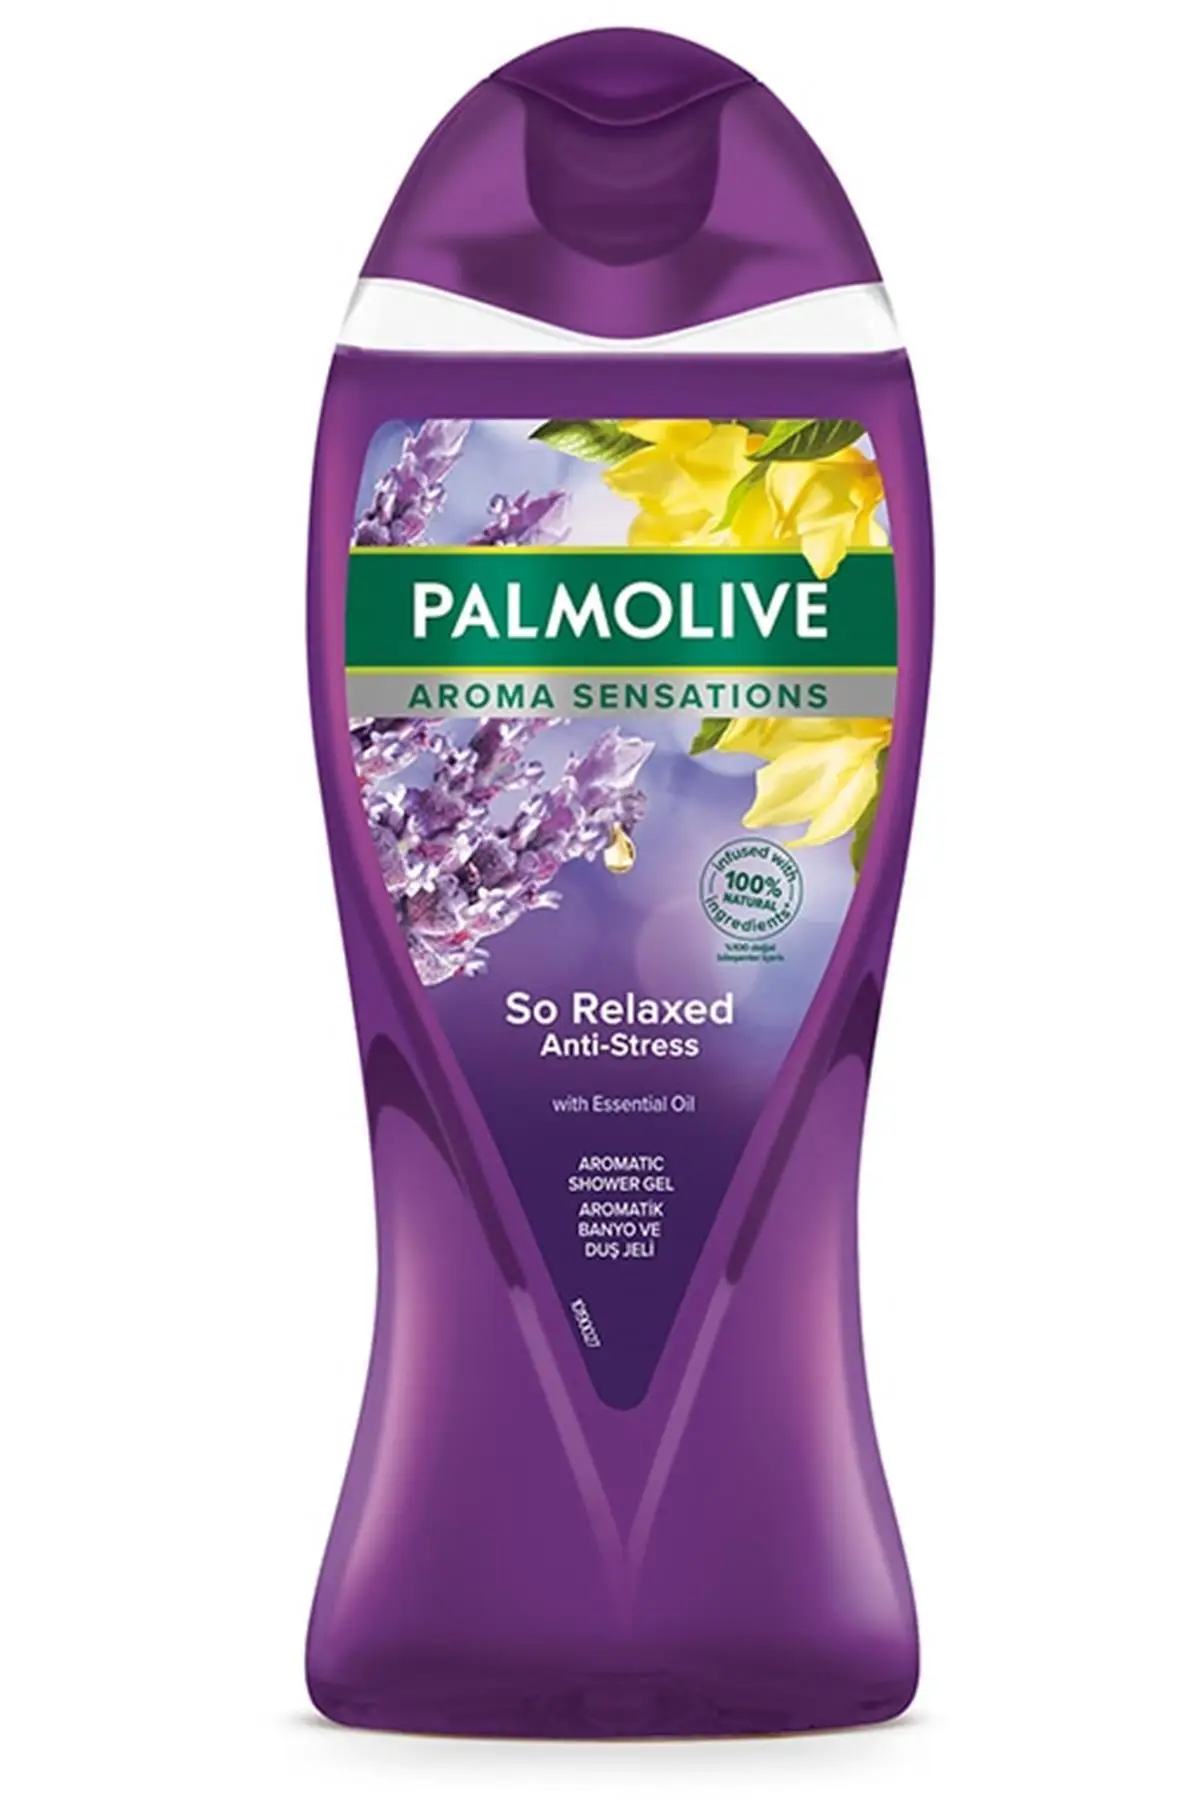 

Brand: Palmolive Aroma Sensations So Relaxed Aromatic Bath and Shower Gel 500 ml Category: Shower Gel